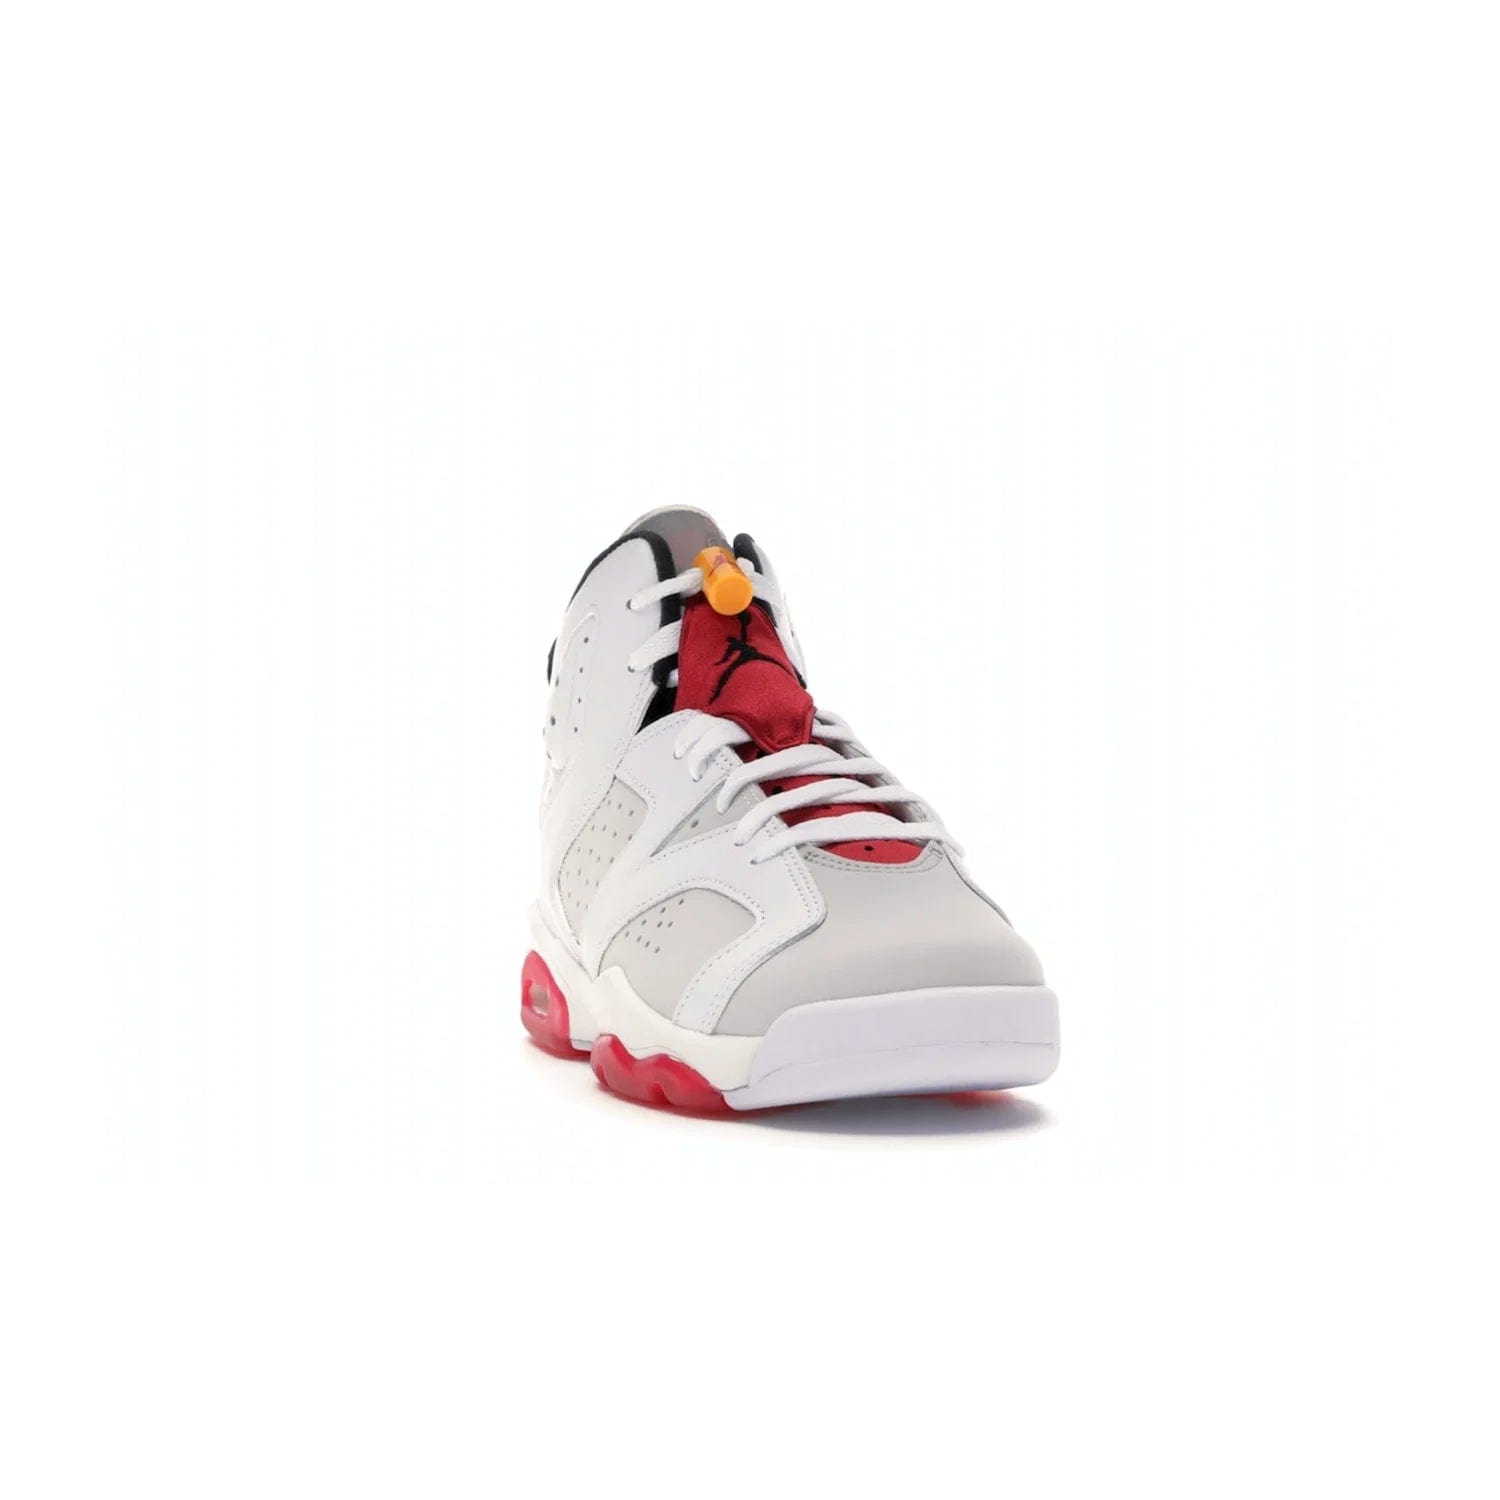 Jordan 6 Retro Hare (GS) - Image 8 - Only at www.BallersClubKickz.com - The Air Jordan 6 Hare GS. Comfortable suede upper, perforations, red pods, two-tone midsole, and signature "Jumpman" emblem. Released 17 June 2020. Perfect for any sneakerhead.